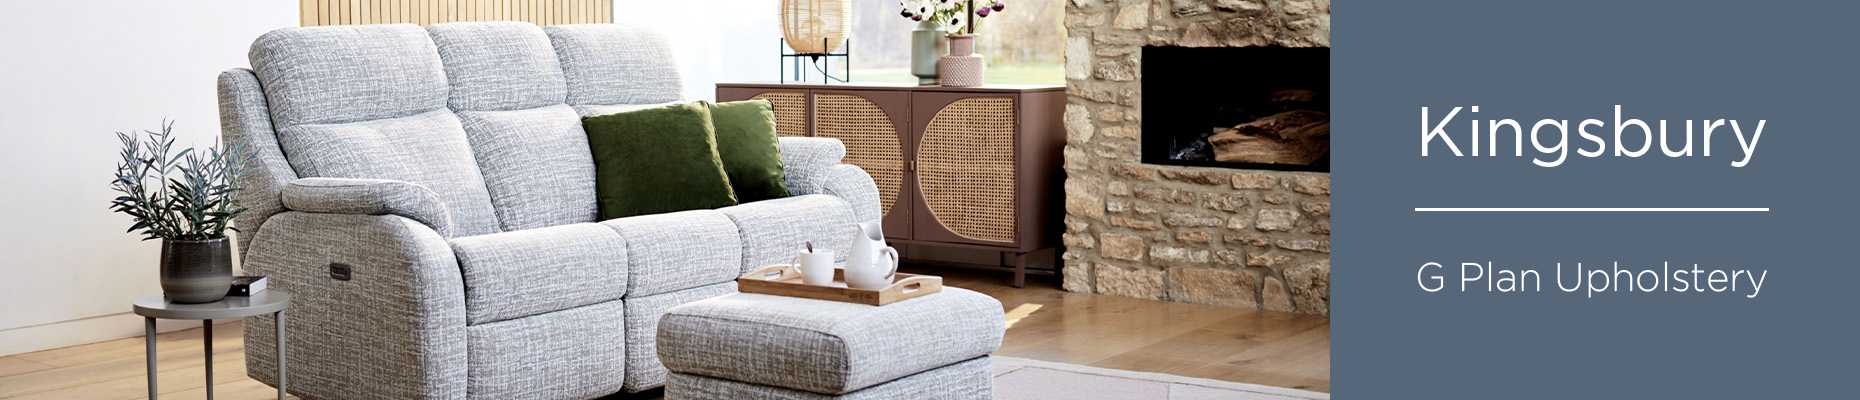 Kingsbury collection by G Plan Upholstery at Forrest Furnishing